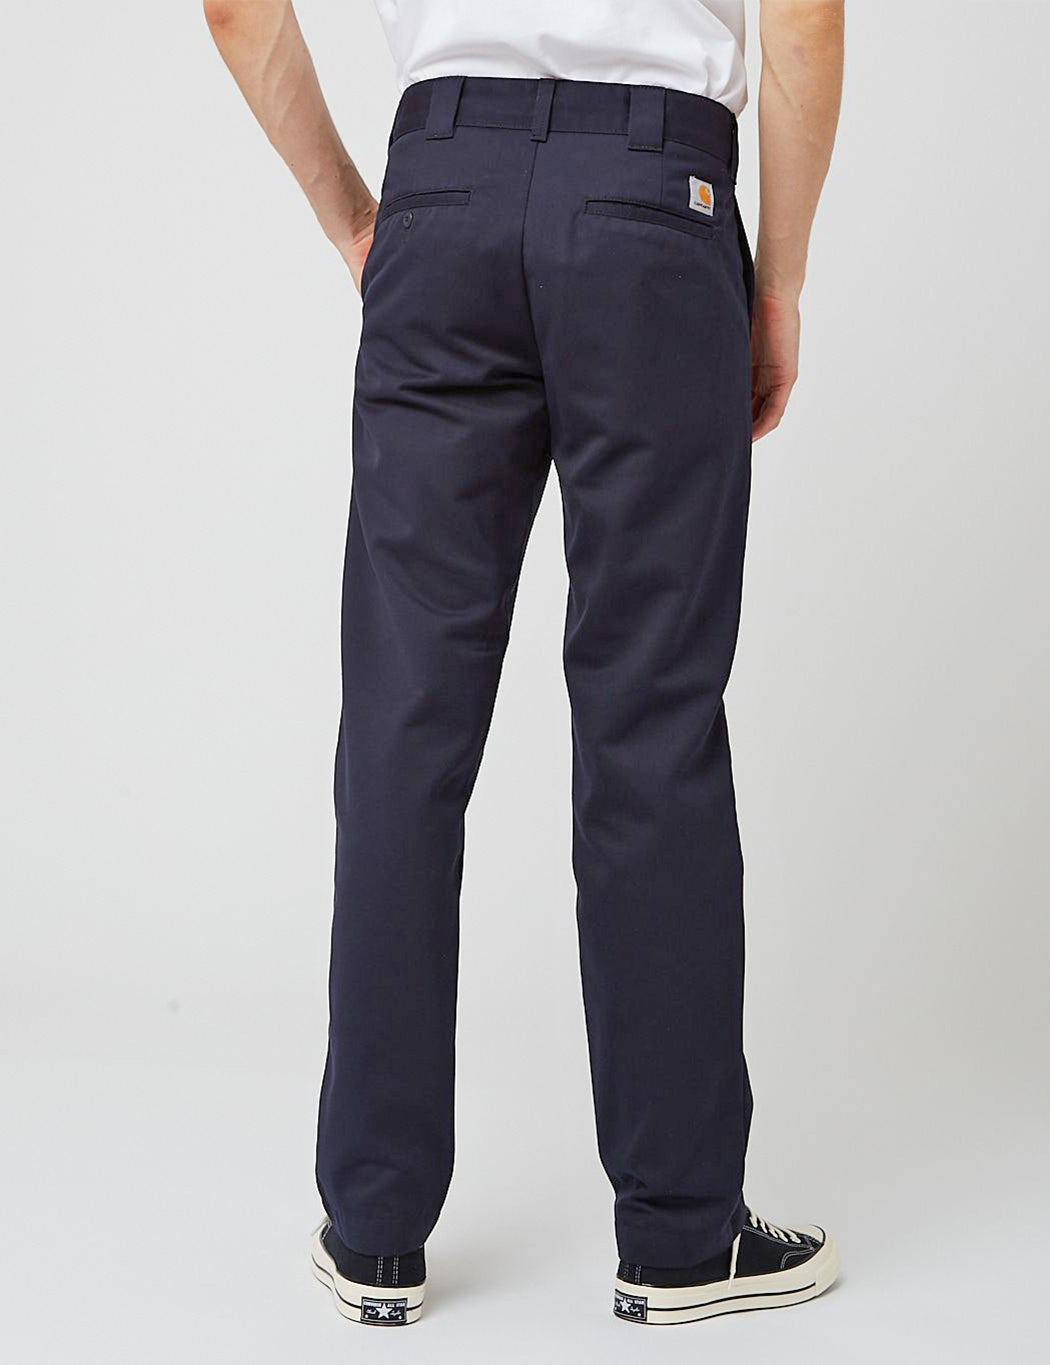 Carhartt-WIP Master Pant (Relaxed) - Dark Navy Blue I URBAN EXCESS.